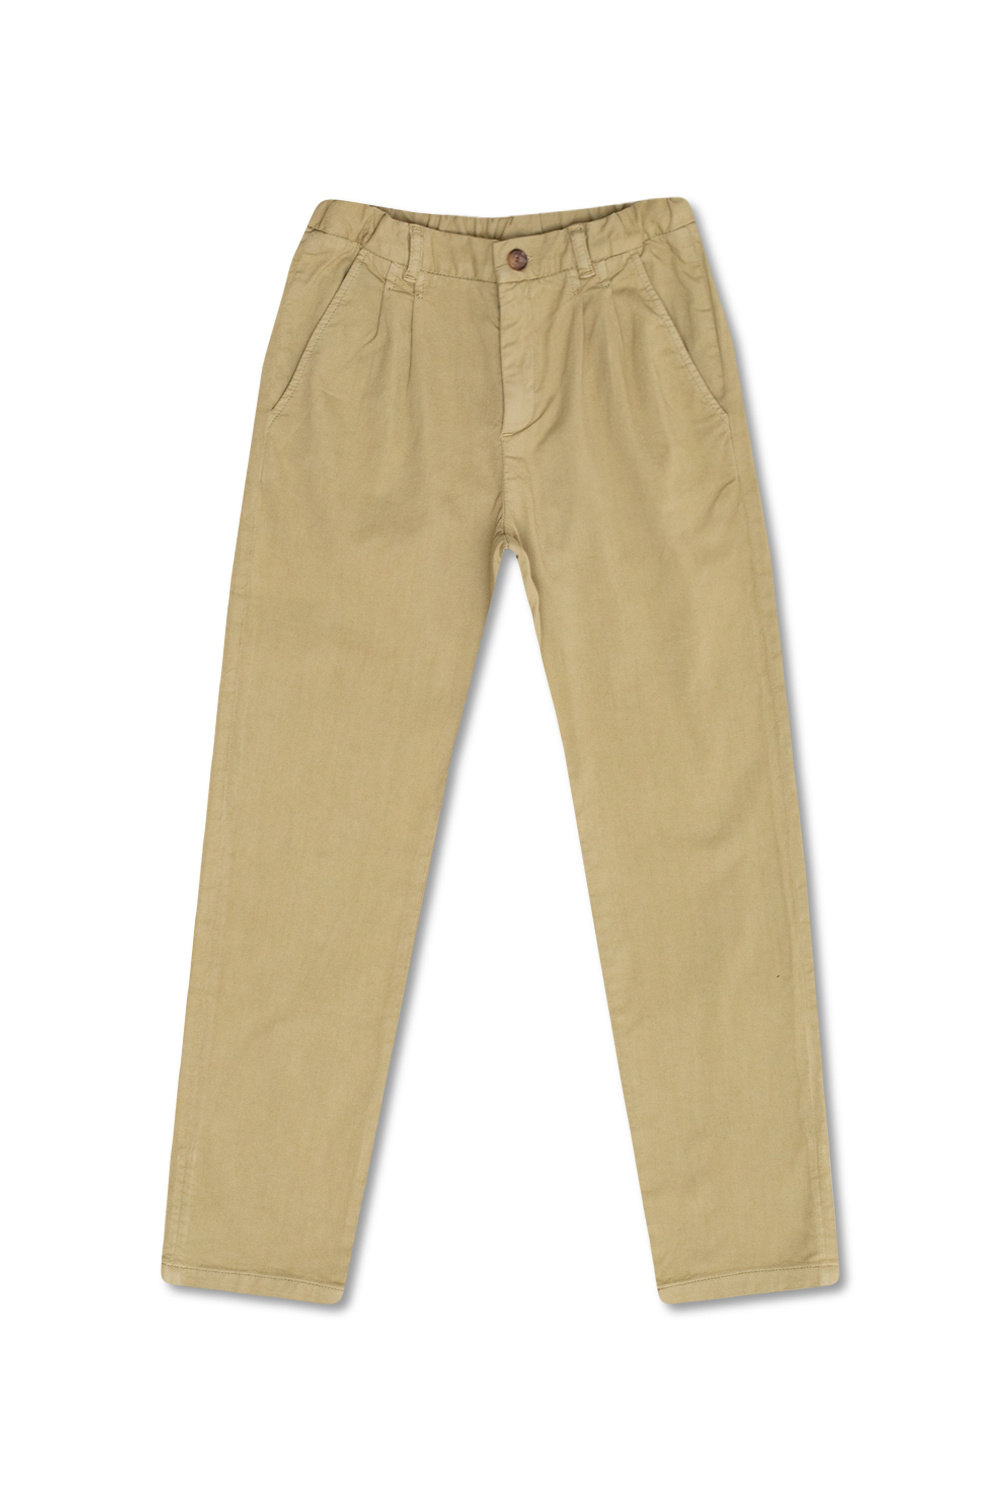 Bonpoint  Script trousers with pockets